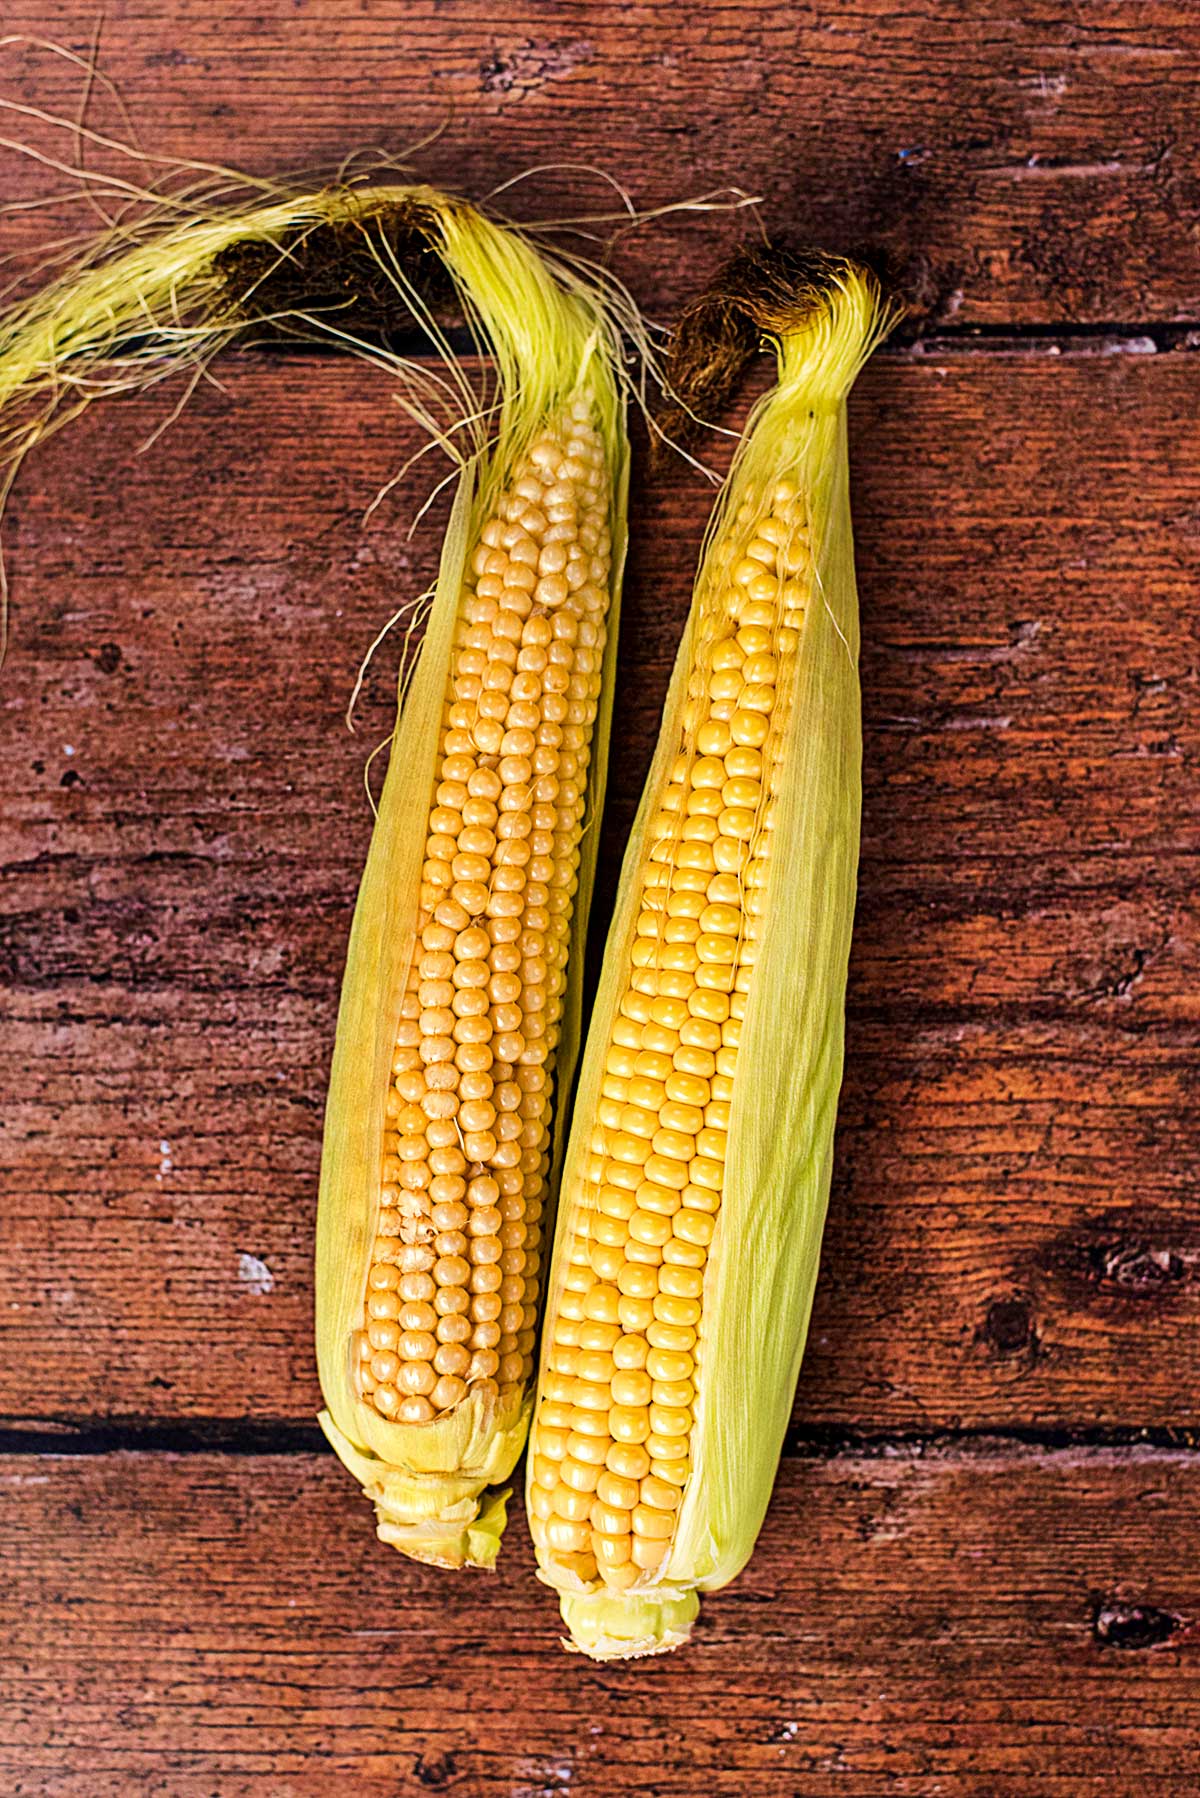 Two ears of corn on a wooden surface.